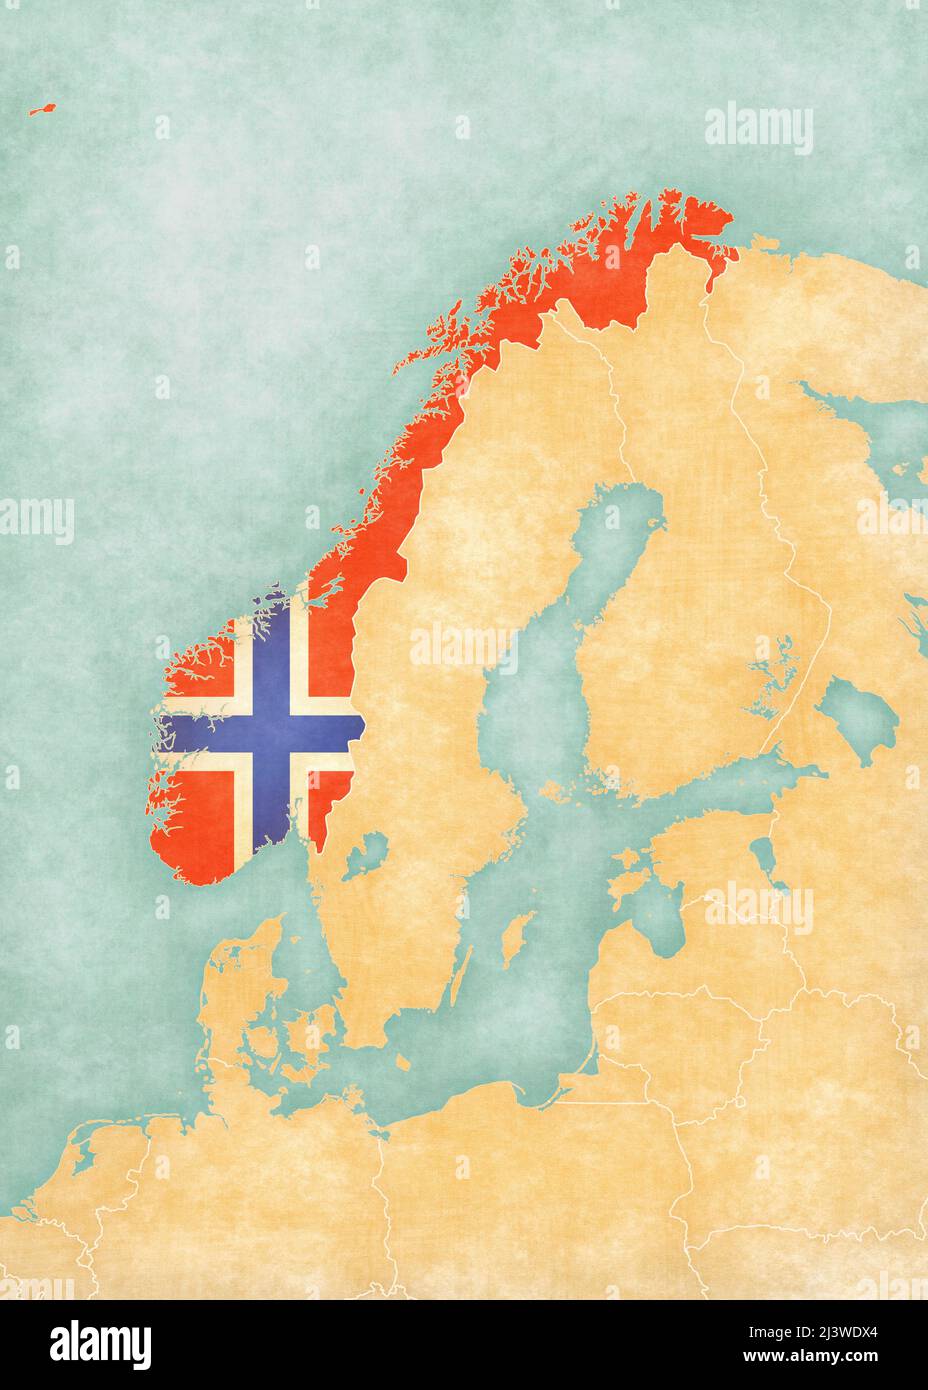 Norway (Norwegian flag) on the map of Scandinavia in soft grunge and vintage style, like watercolor painting on old paper. Stock Photo